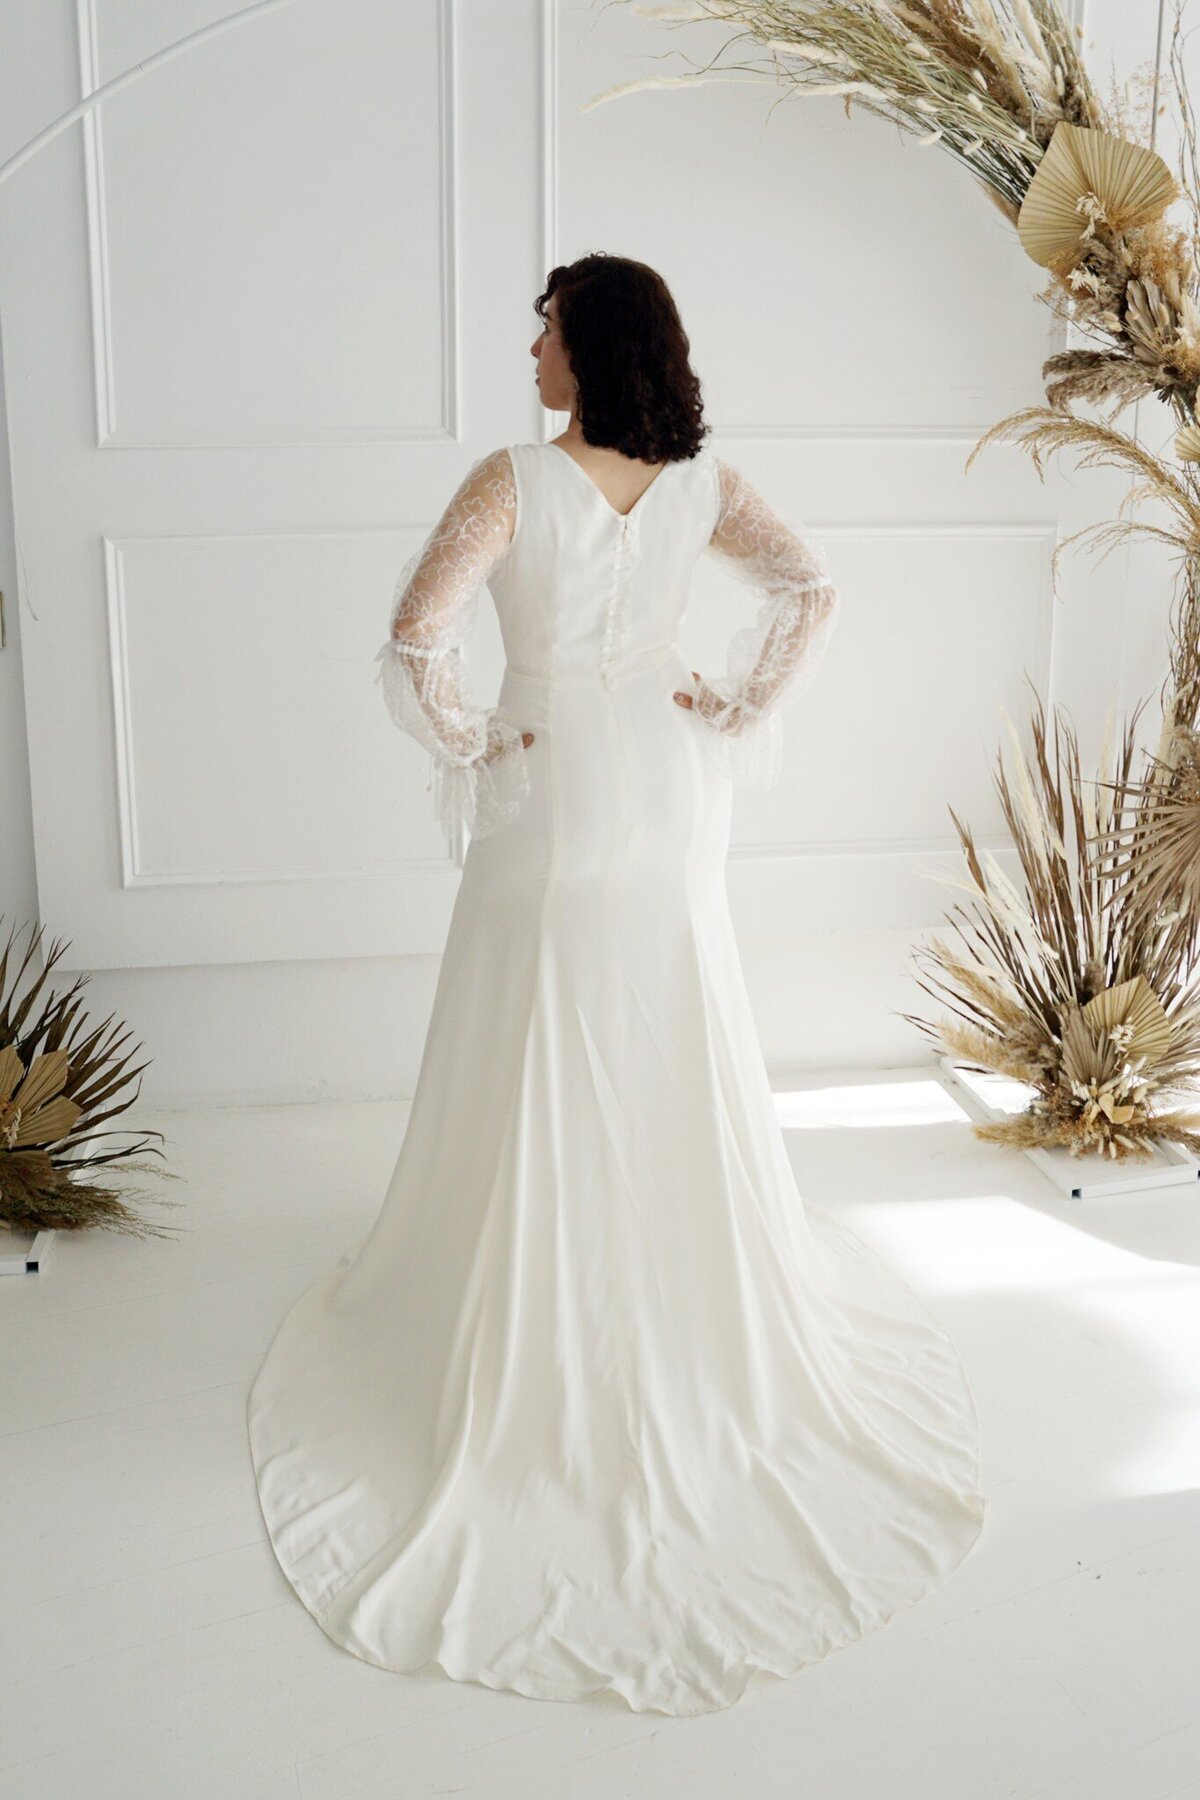 The back of the Harlow style is accented with a column of small bows that line the zipper from the v-back to the waist.